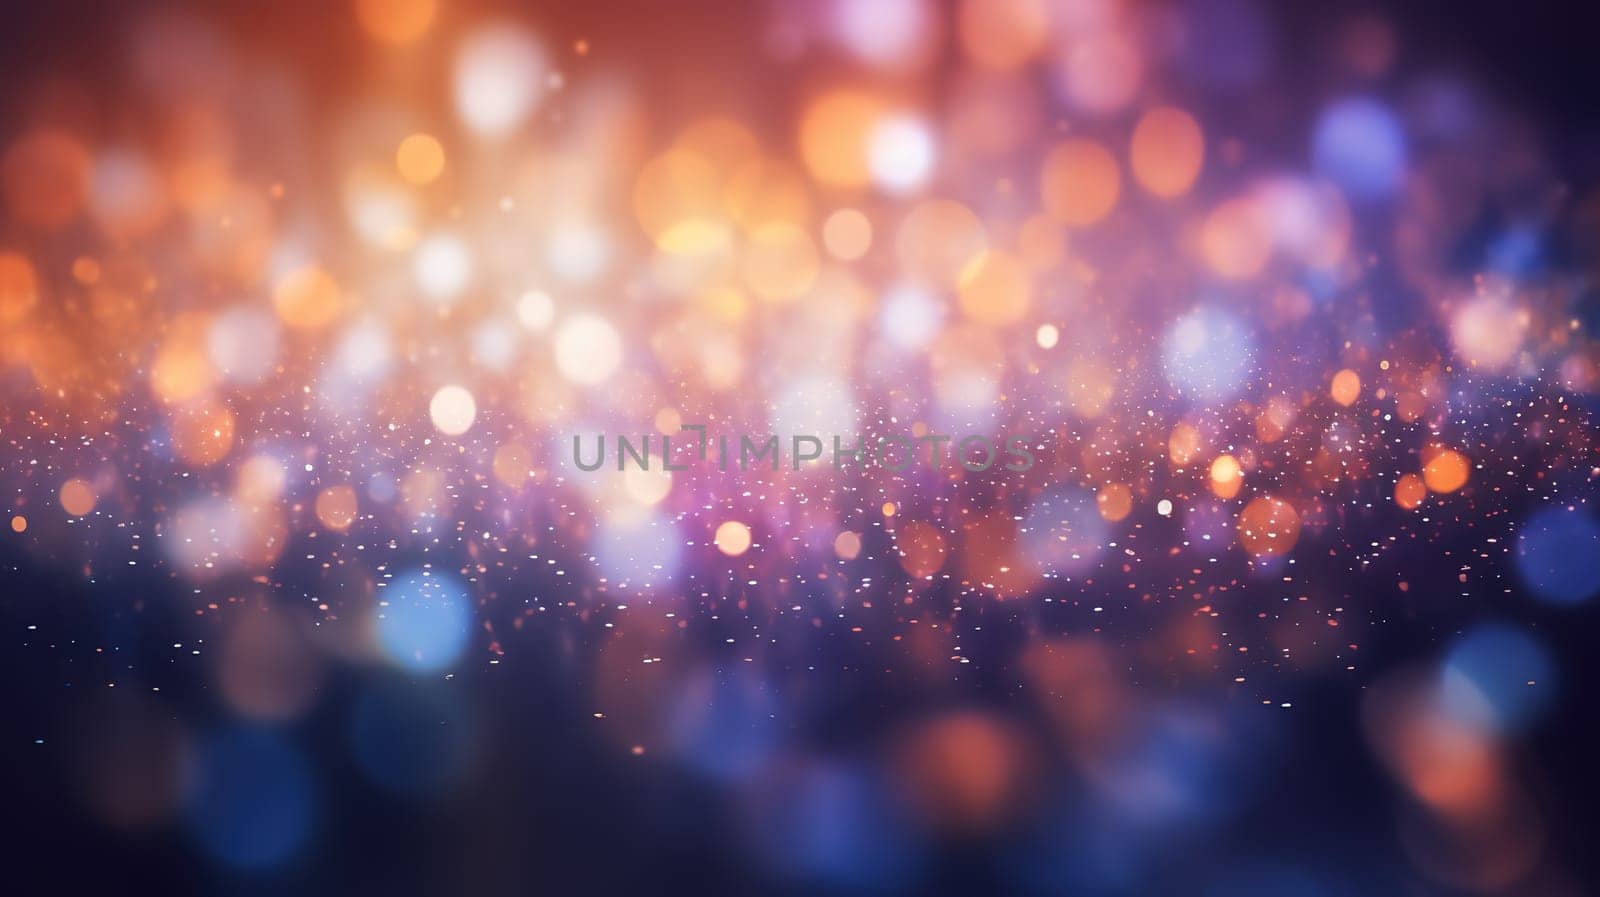 Blurred glowing sparkling with a colorful lights and effects